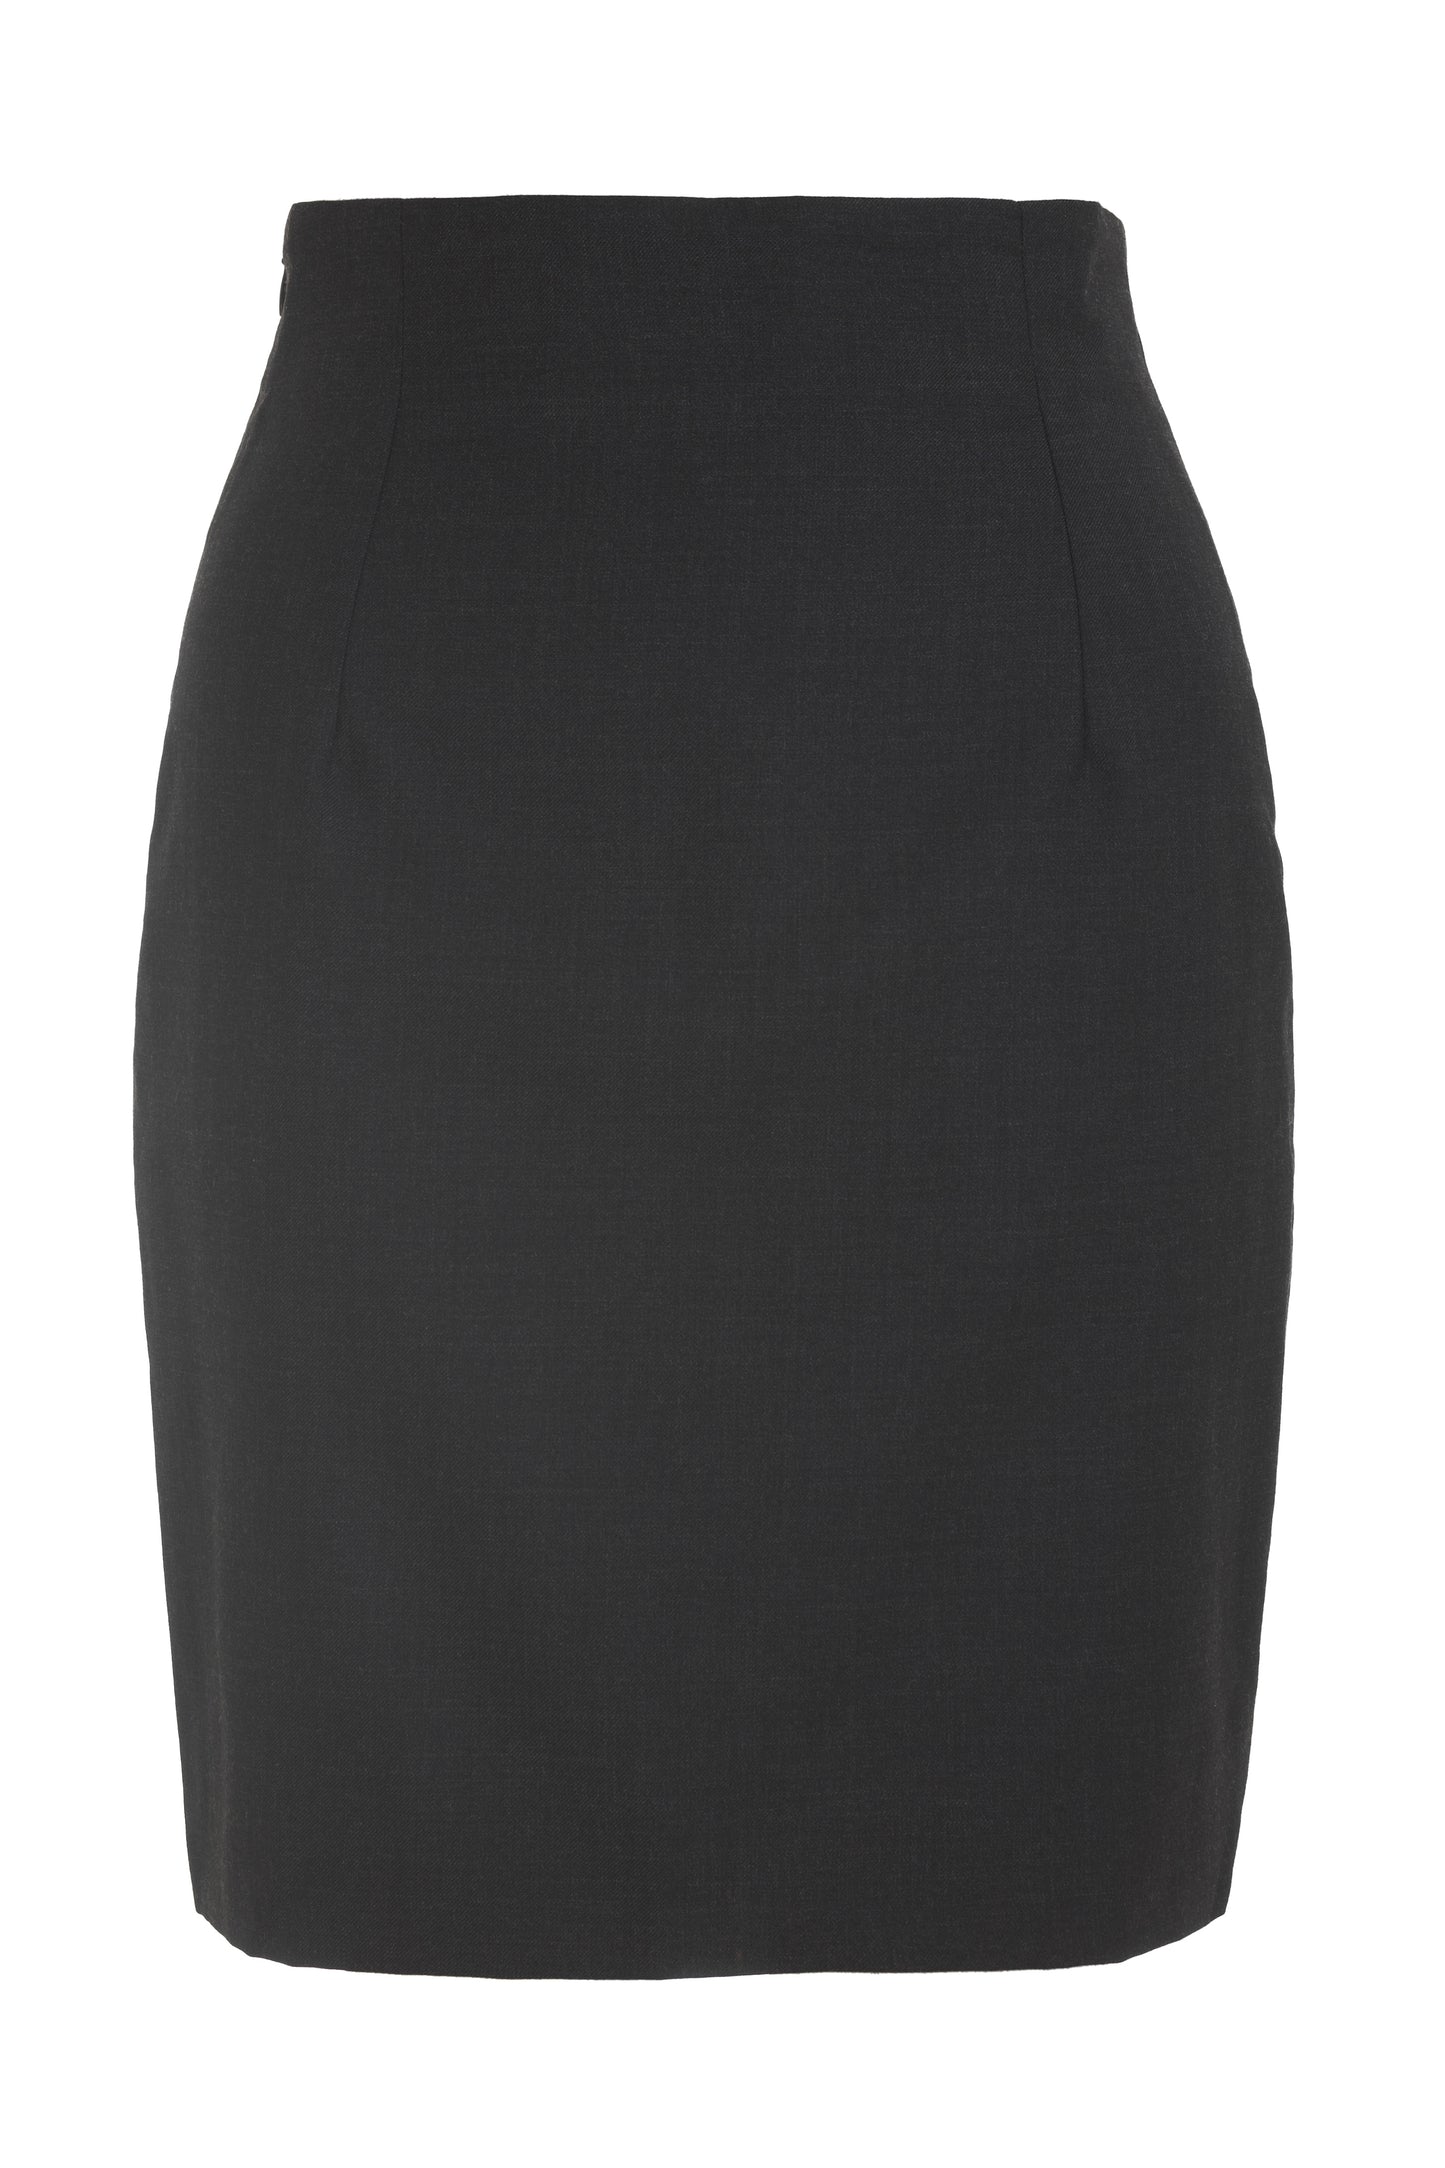 Gianni Versace Couture black wool skirt